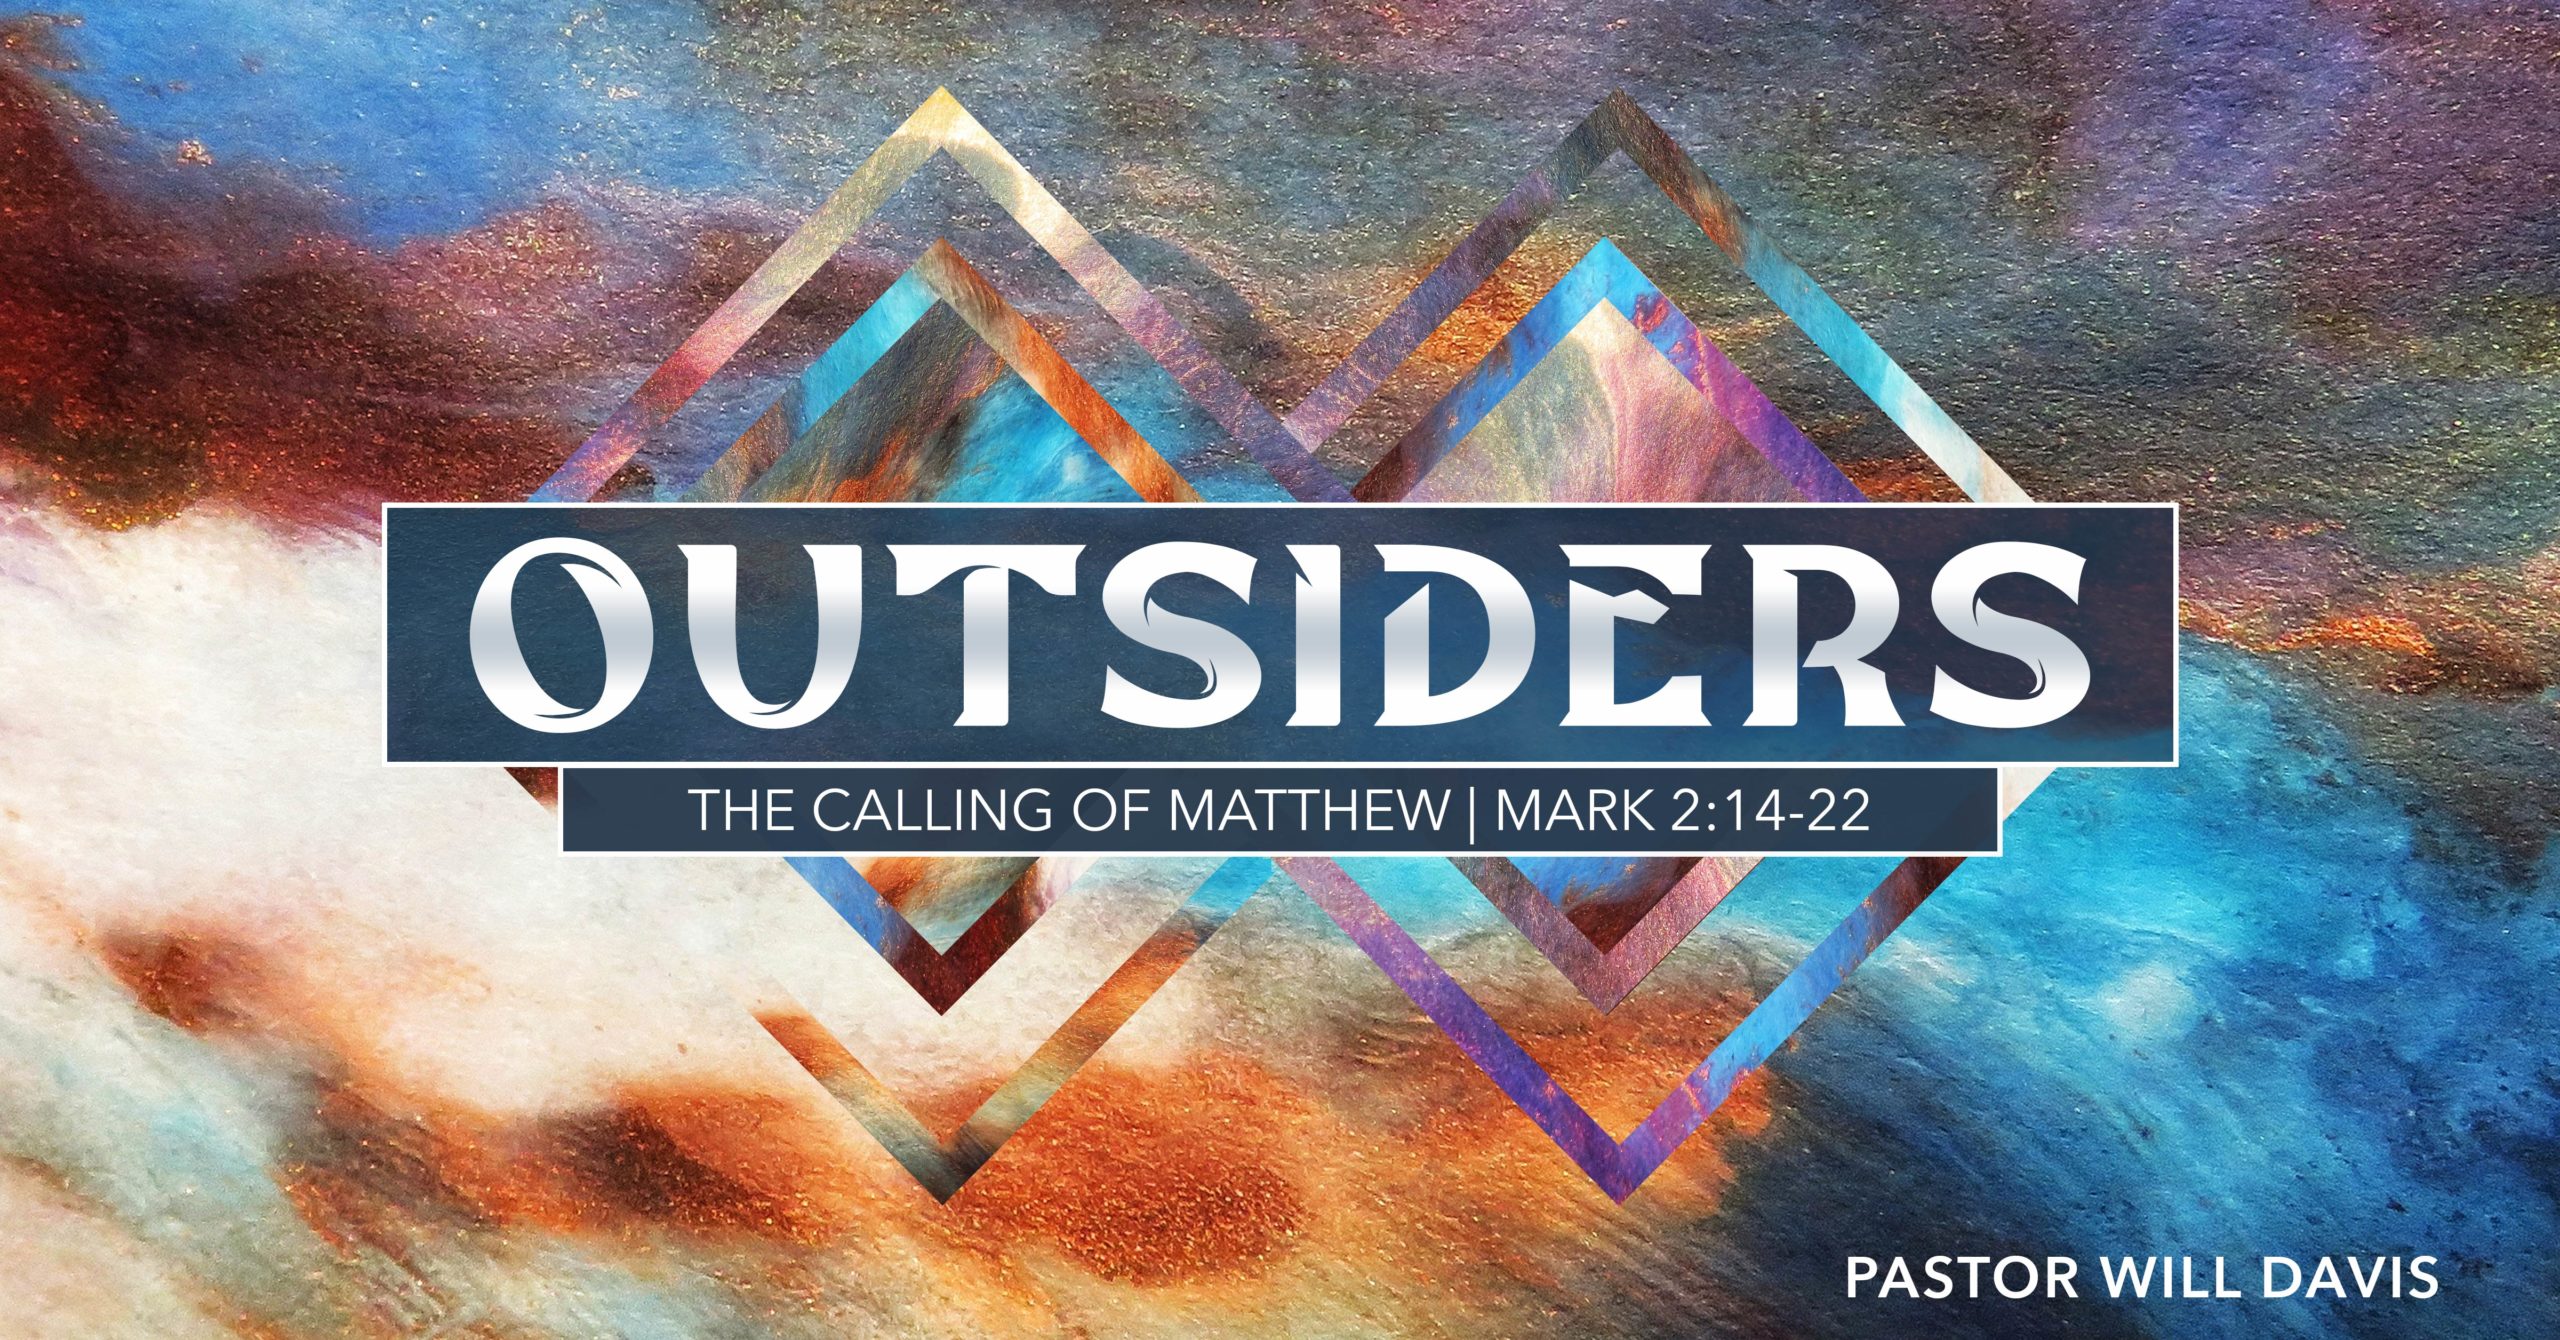 Outsiders: The Calling of Matthew